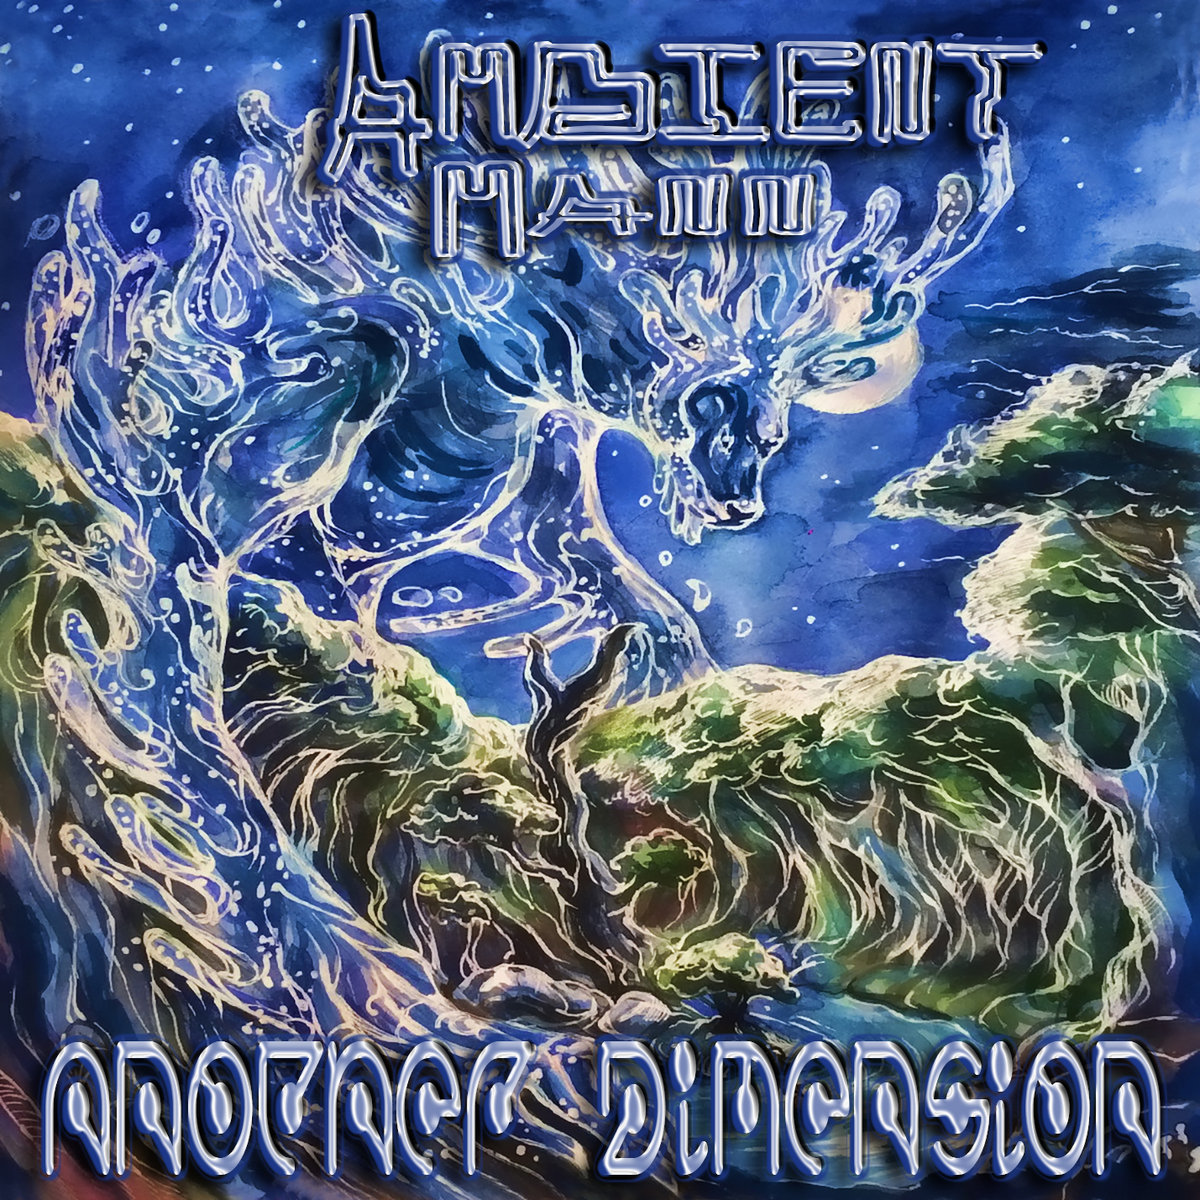 Another dimension. Music from another Dimension! Album Cover.